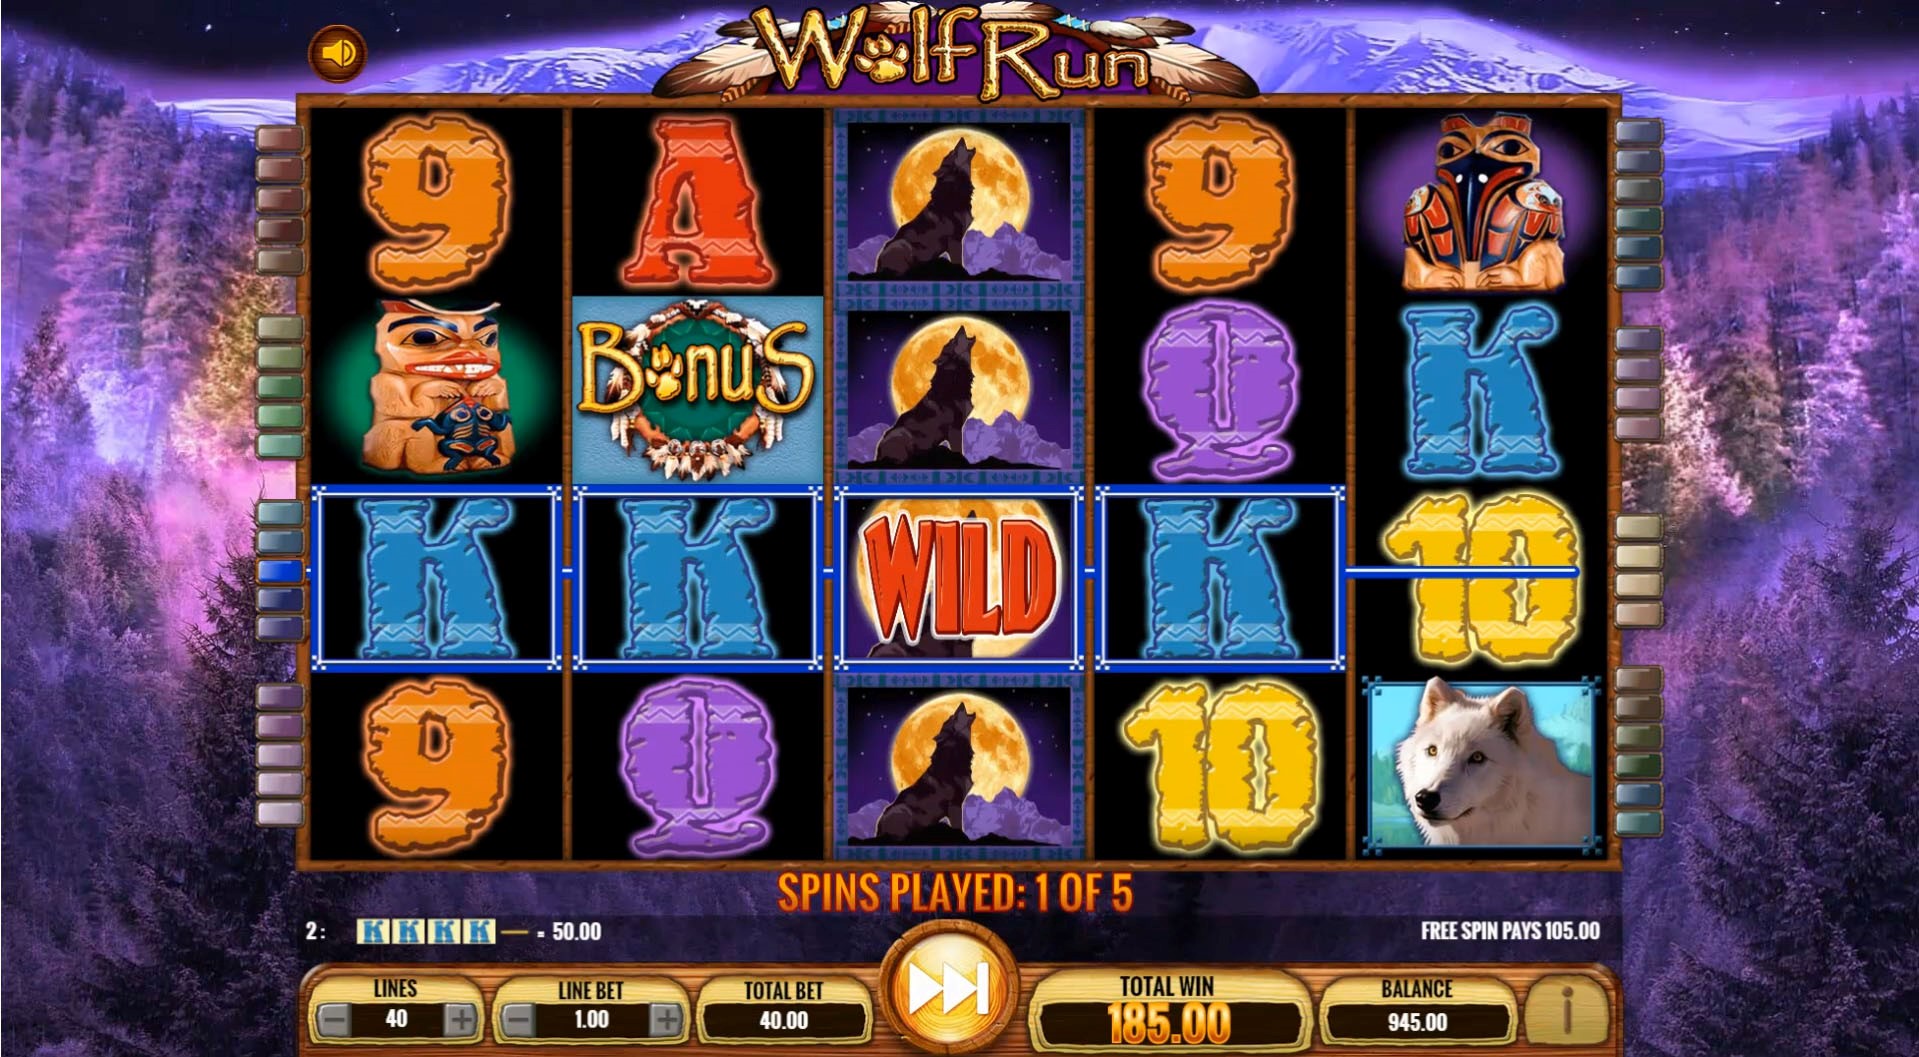 Wolf Run slot’s Free Spins mode uses a special darker theme to create a sense of excitement